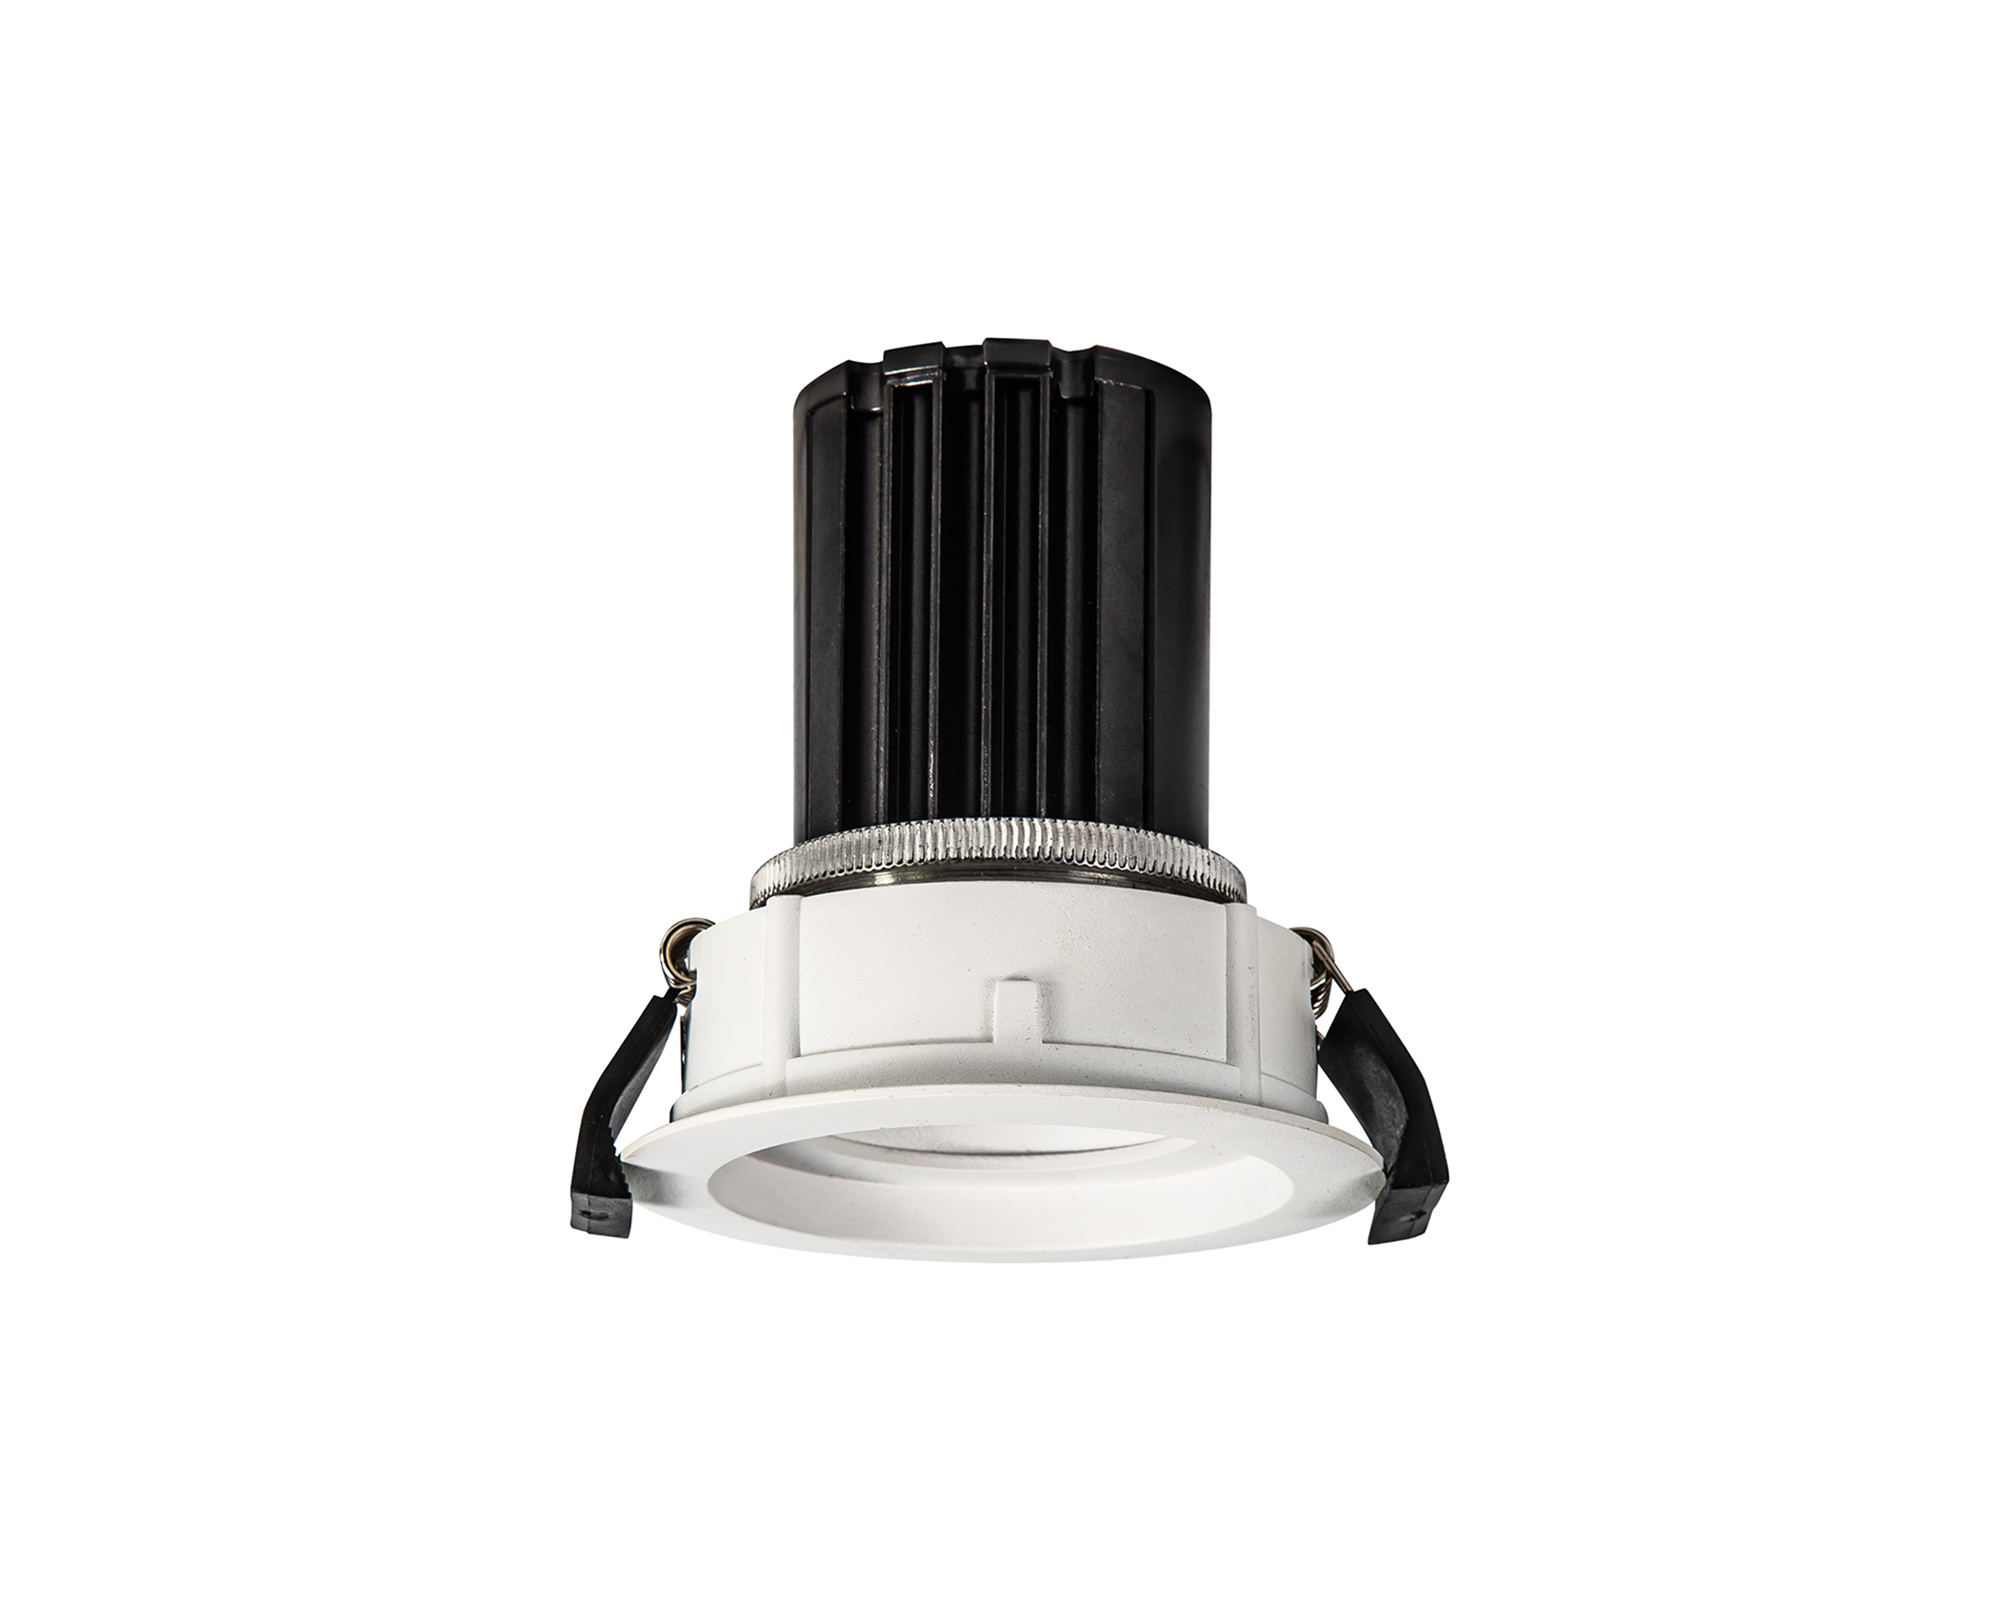 DM201231  Beppe 10 Tridonic powered 10W 2700K 750lm 12° CRI>90 LED Engine White Stepped Fixed Recessed Spotlight; IP20